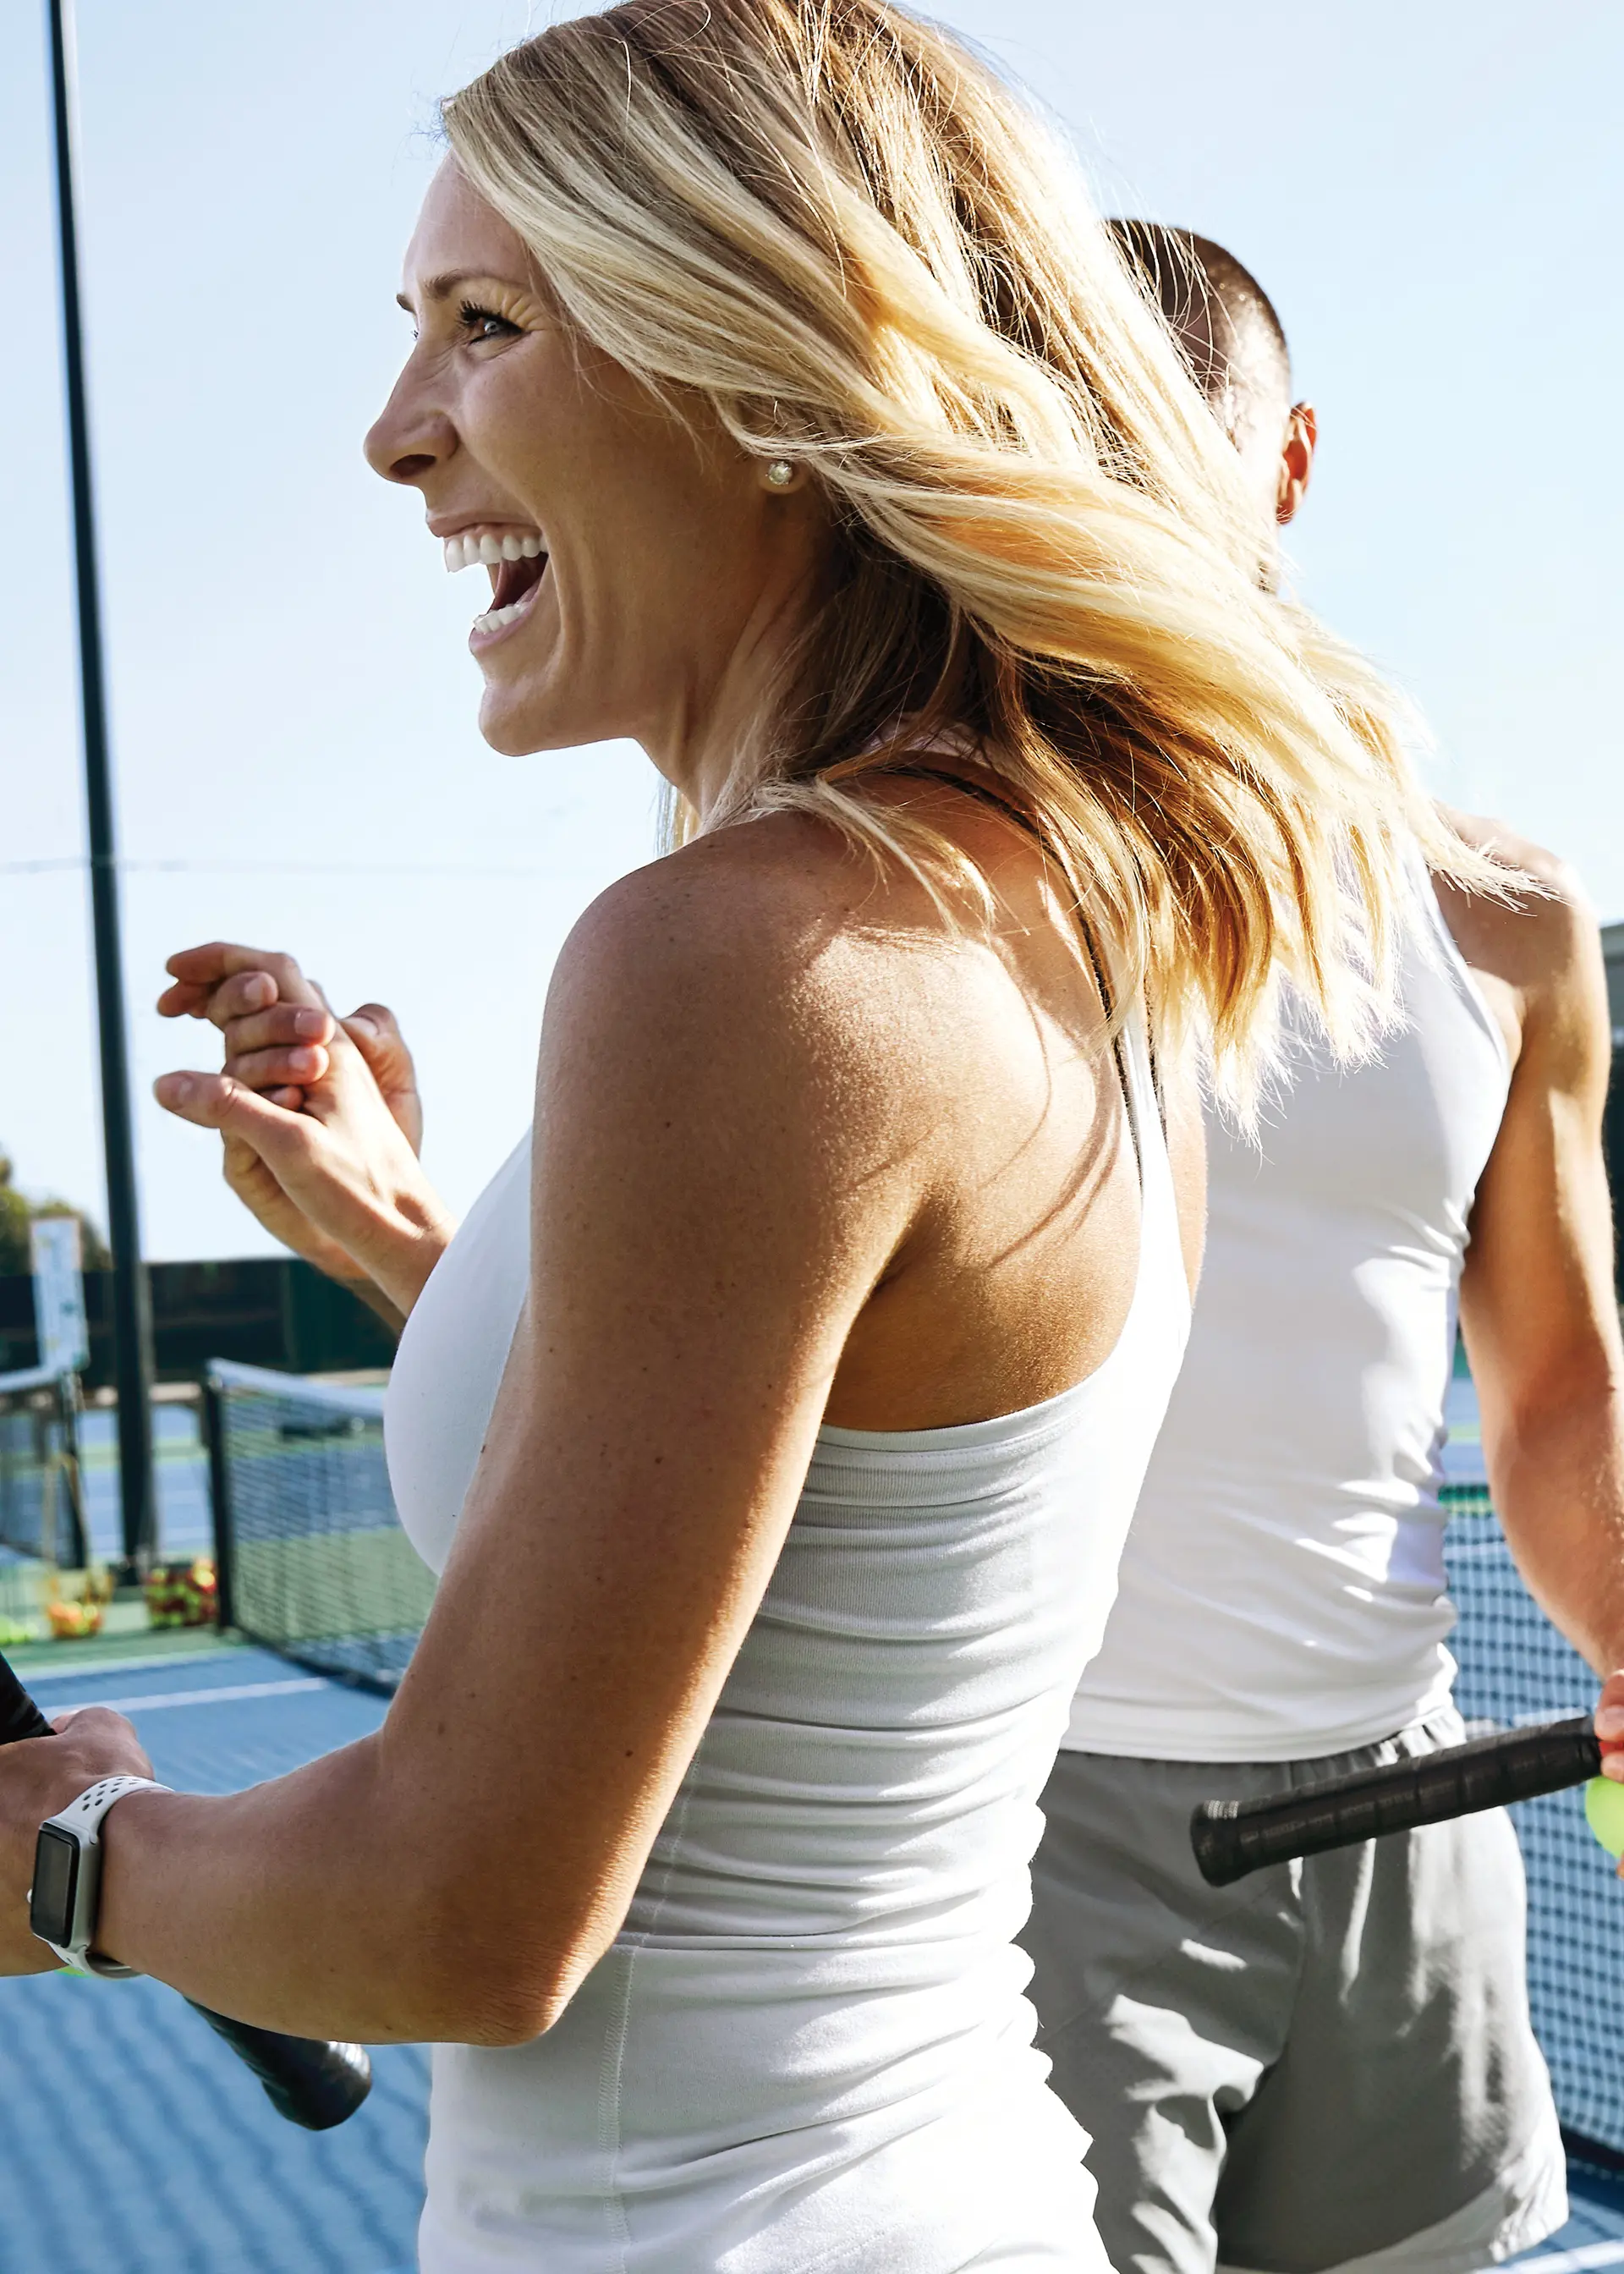 Person smiling and high-fiving another person on an outdoor tennis court